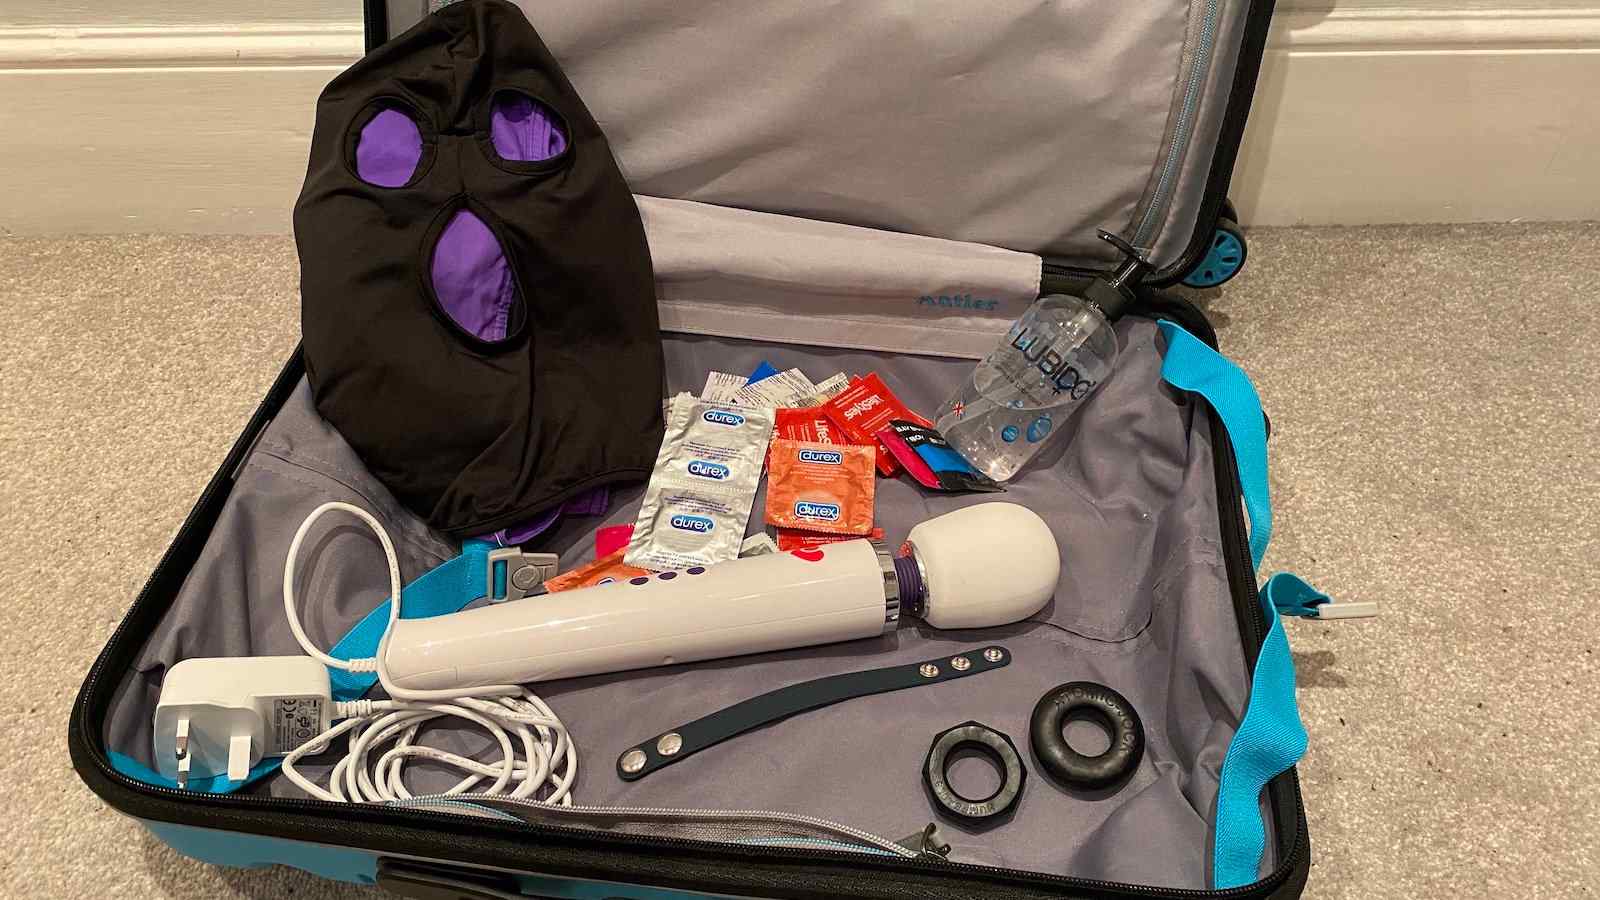 Pack your sex toys in your checked luggage to avoid any embarrassment or stress